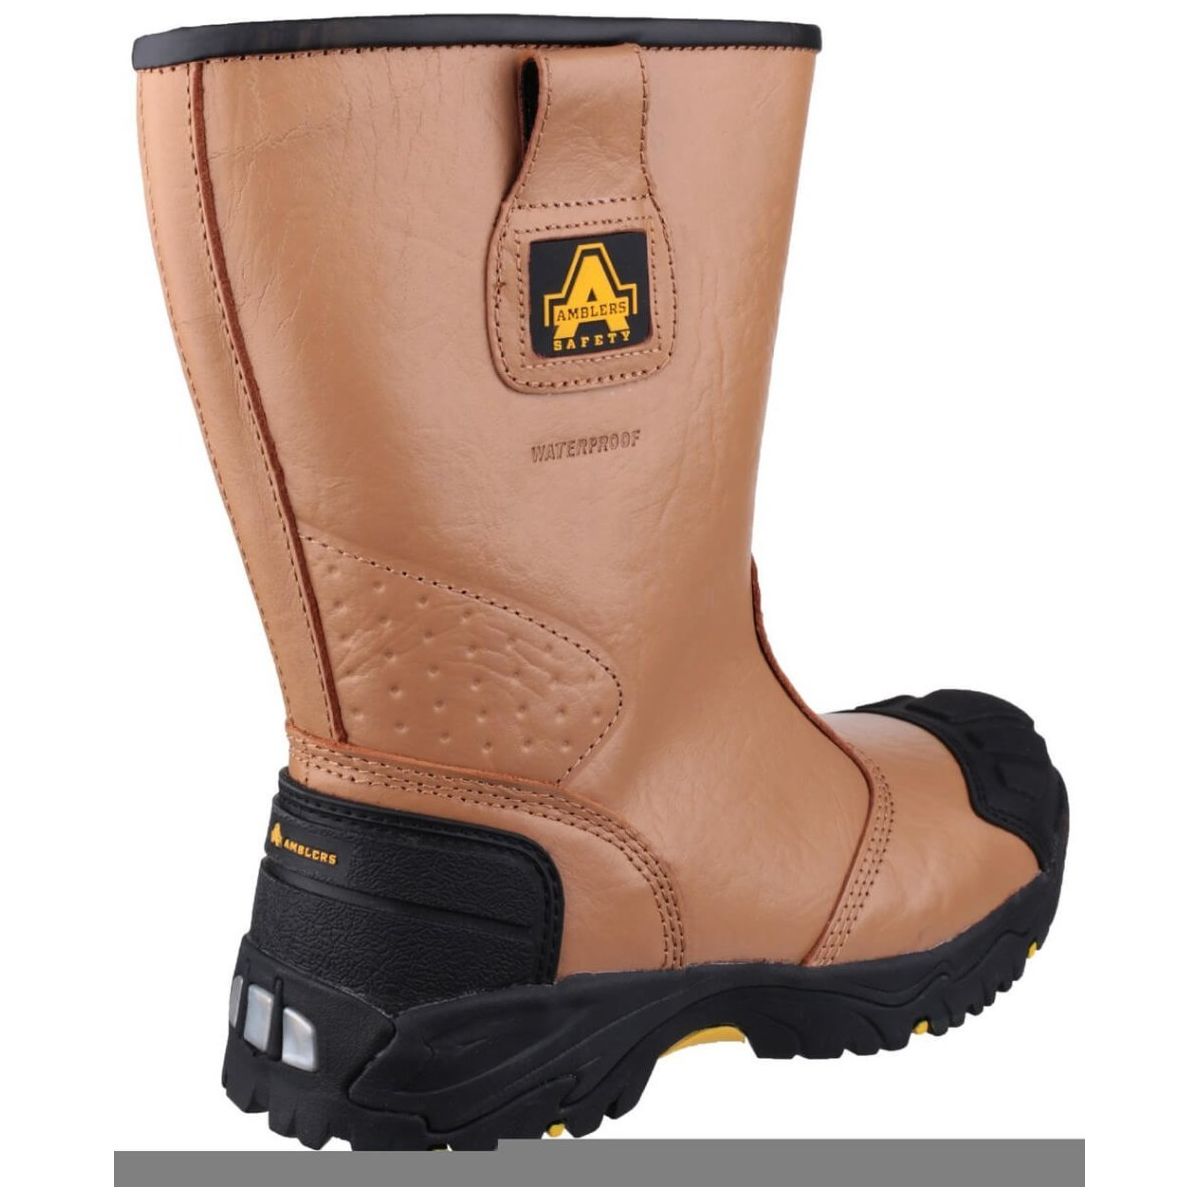 Amblers Fs143 Waterproof Safety Rigger Boots Mens - workweargurus.com